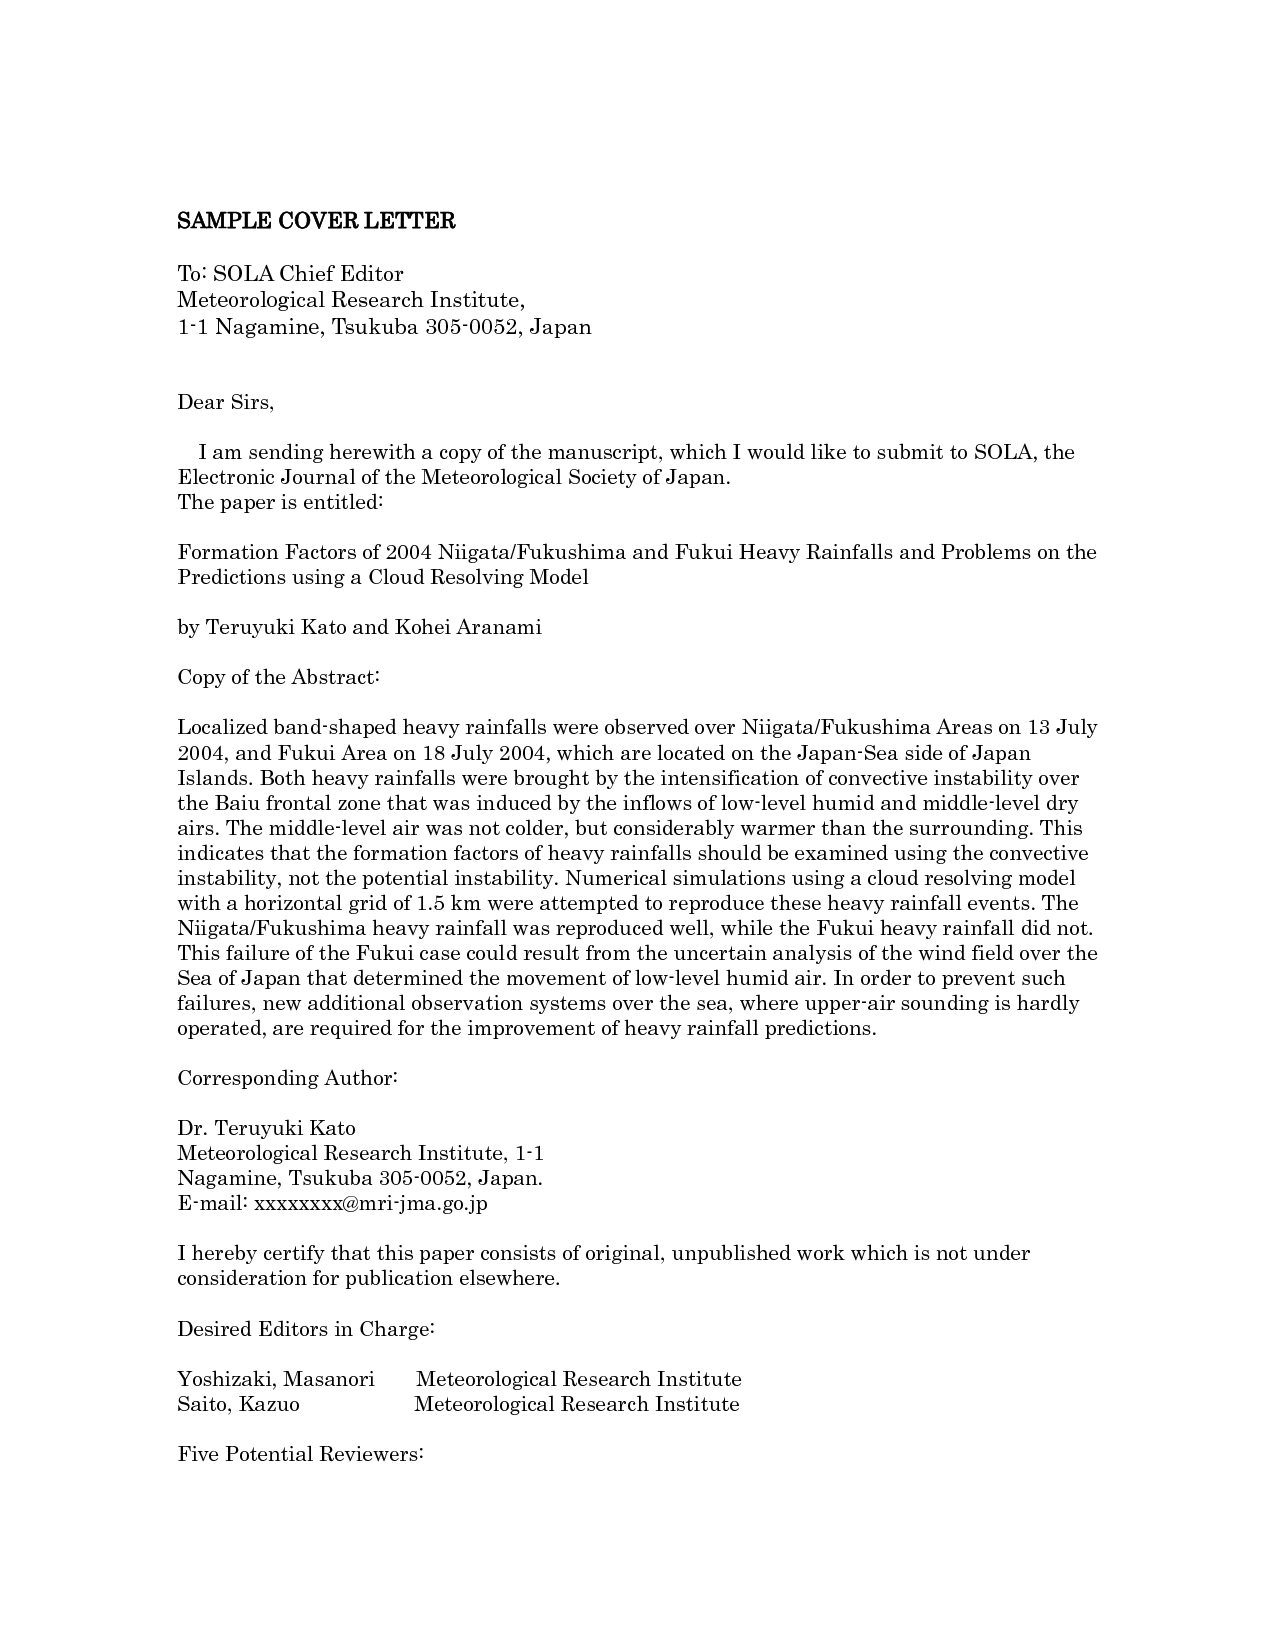 example cover letter to journal